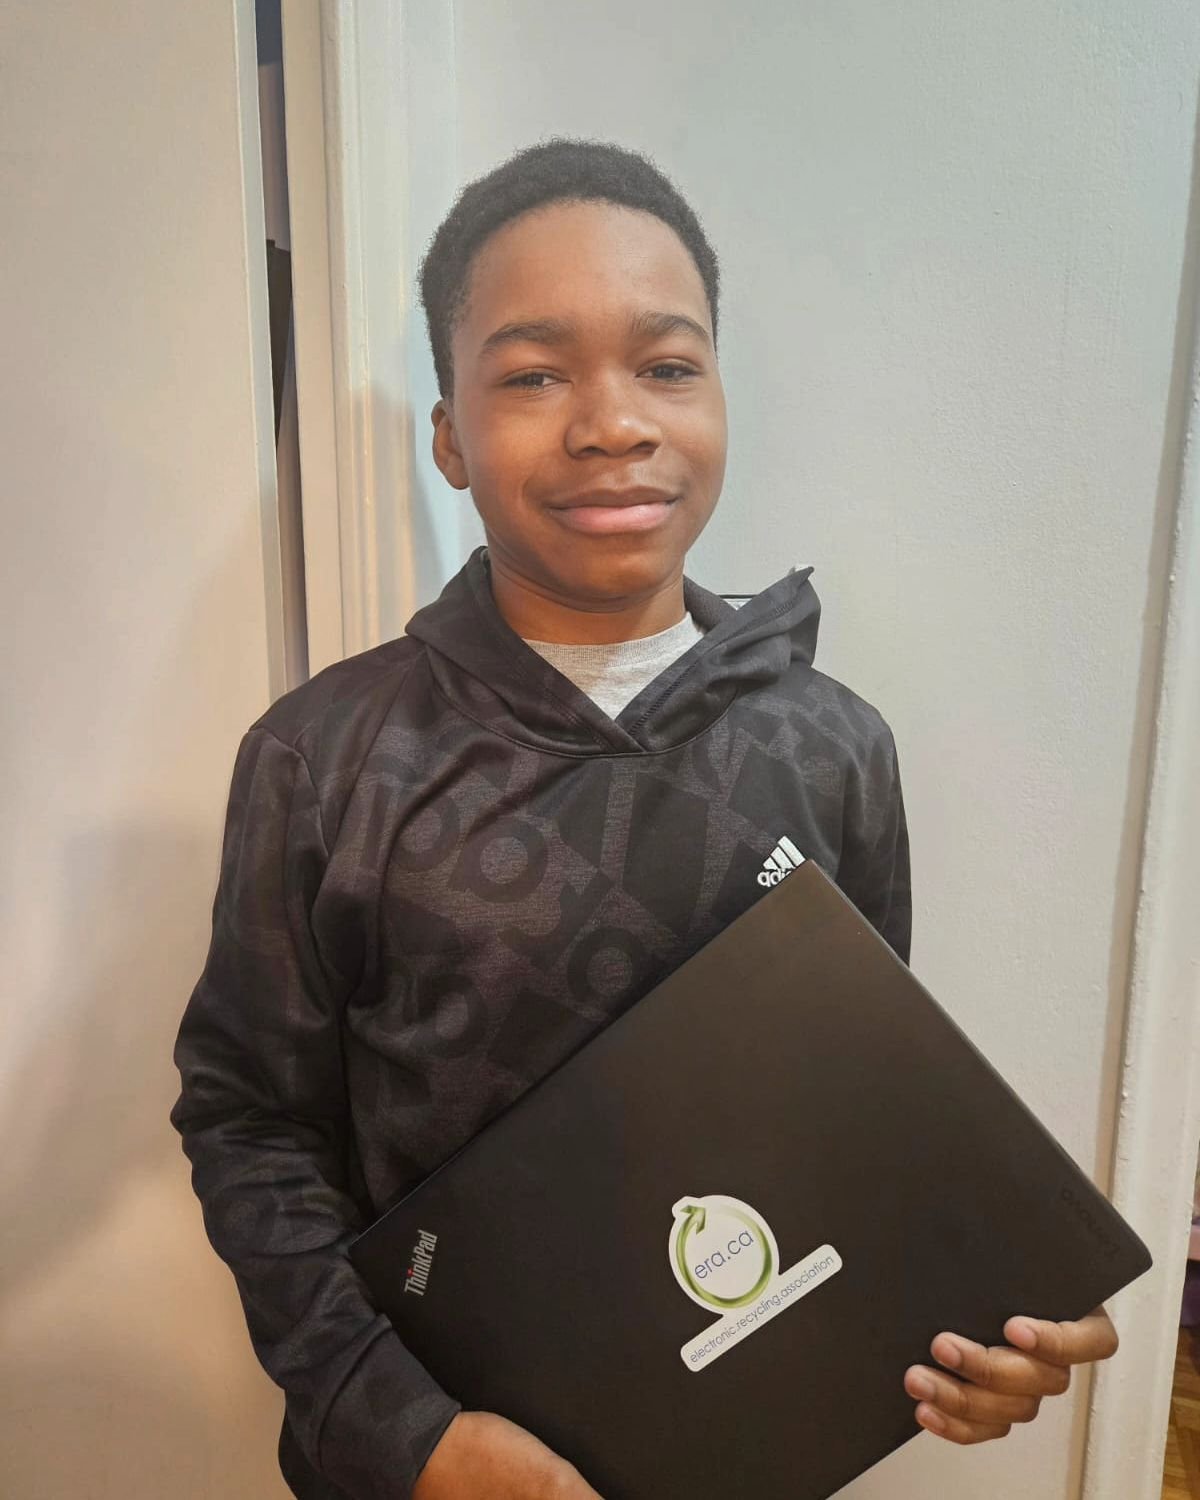 Thank you to everyone that entered our laptop giveaway and congrats to our winner X. Providing students with access to their own CPUs is something with think is critical to reaching their education goals. Thanks to our partners @electronicrecyclingas